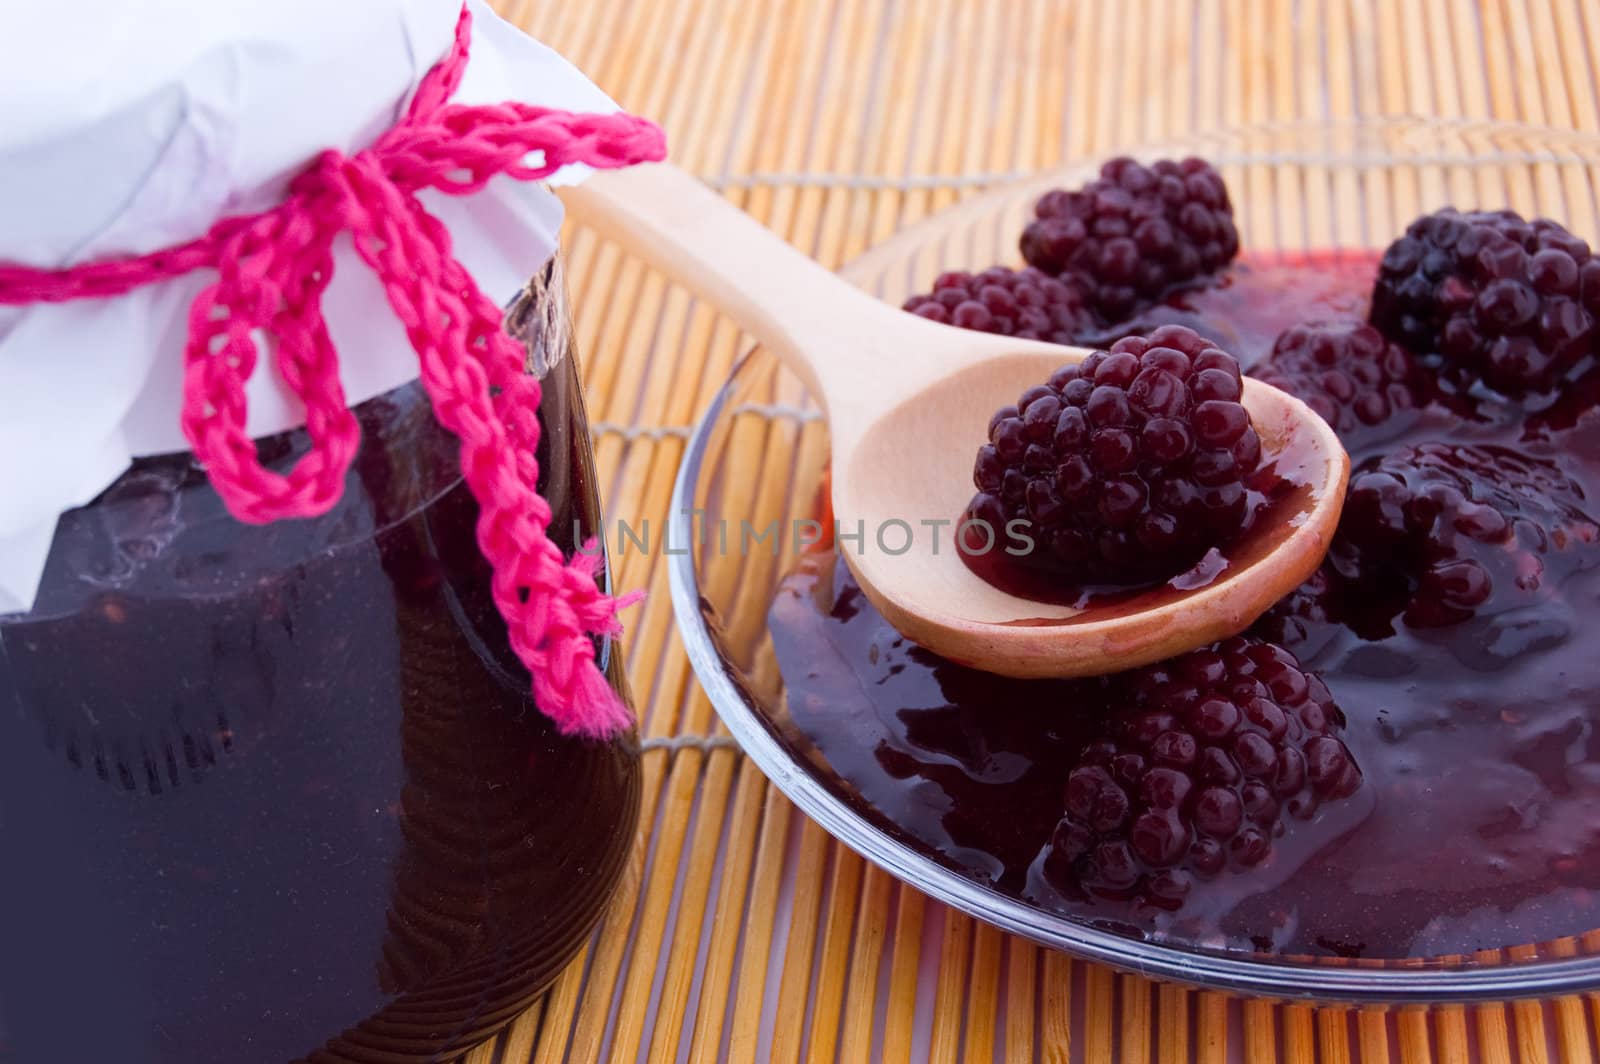 Blackberry jam in bowl and in plate on wooden spoon, focus on berry in plate